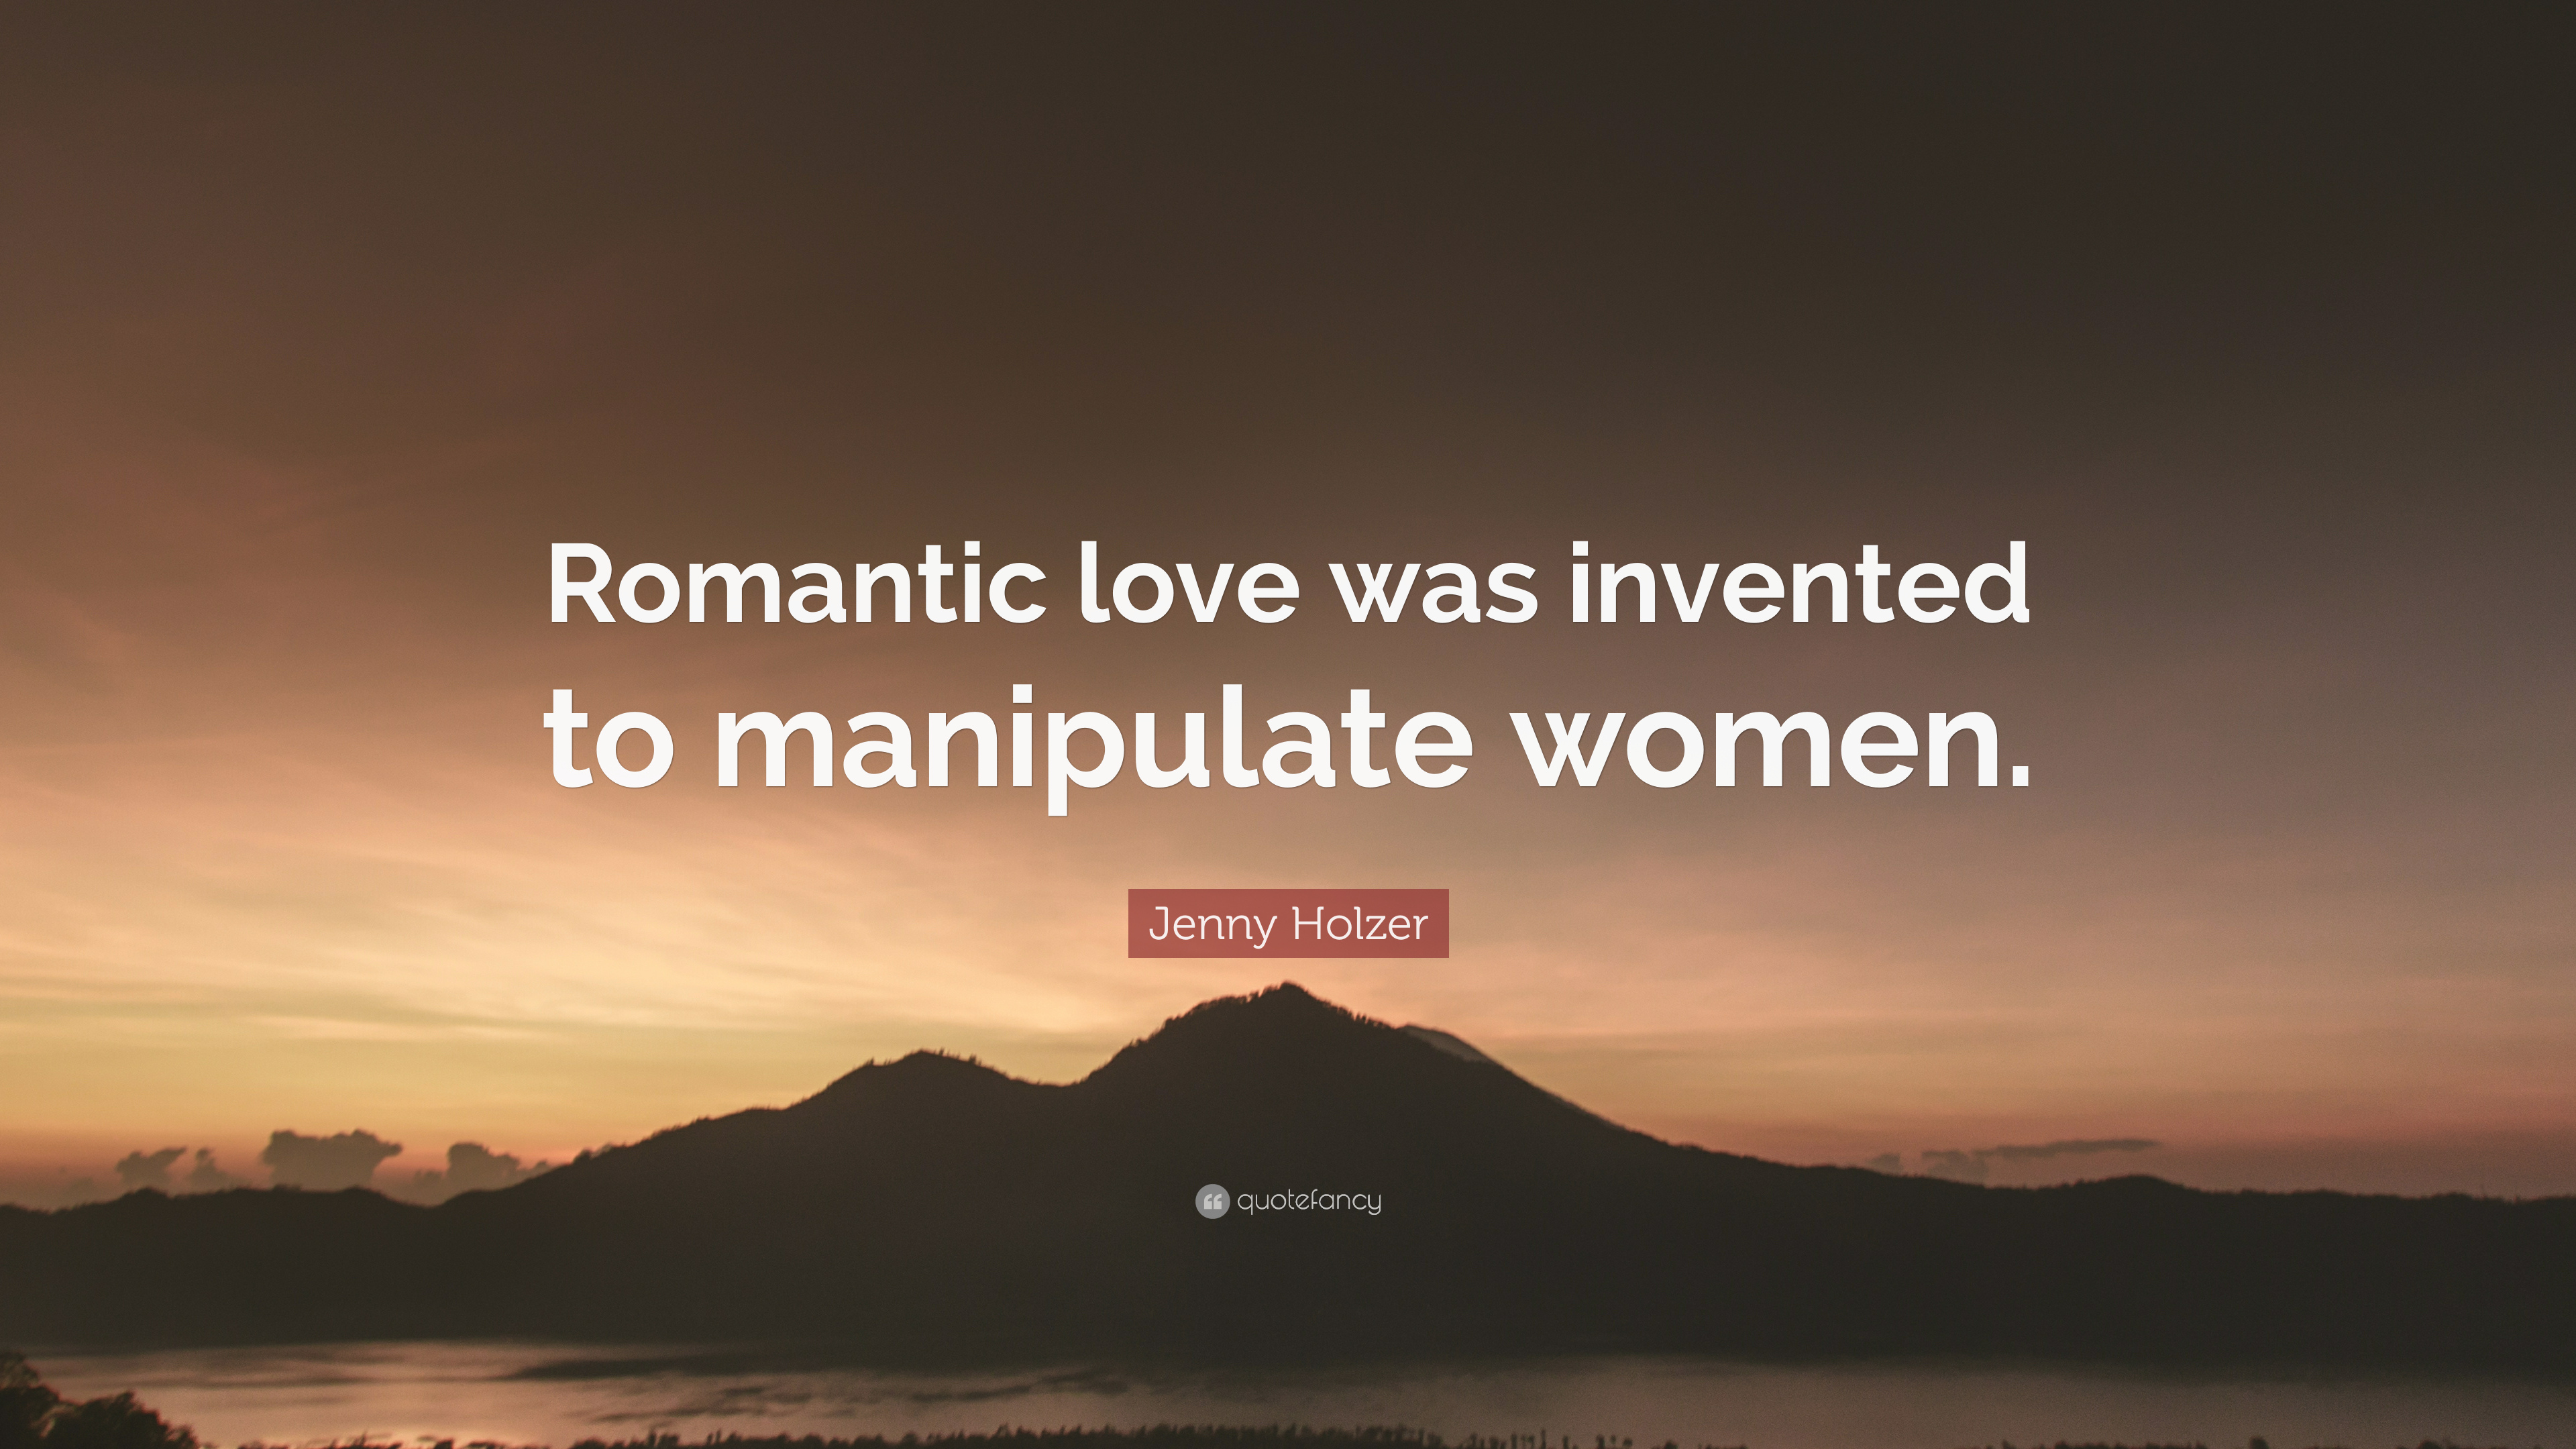 Jenny Holzer Quote: “Romantic love was invented to